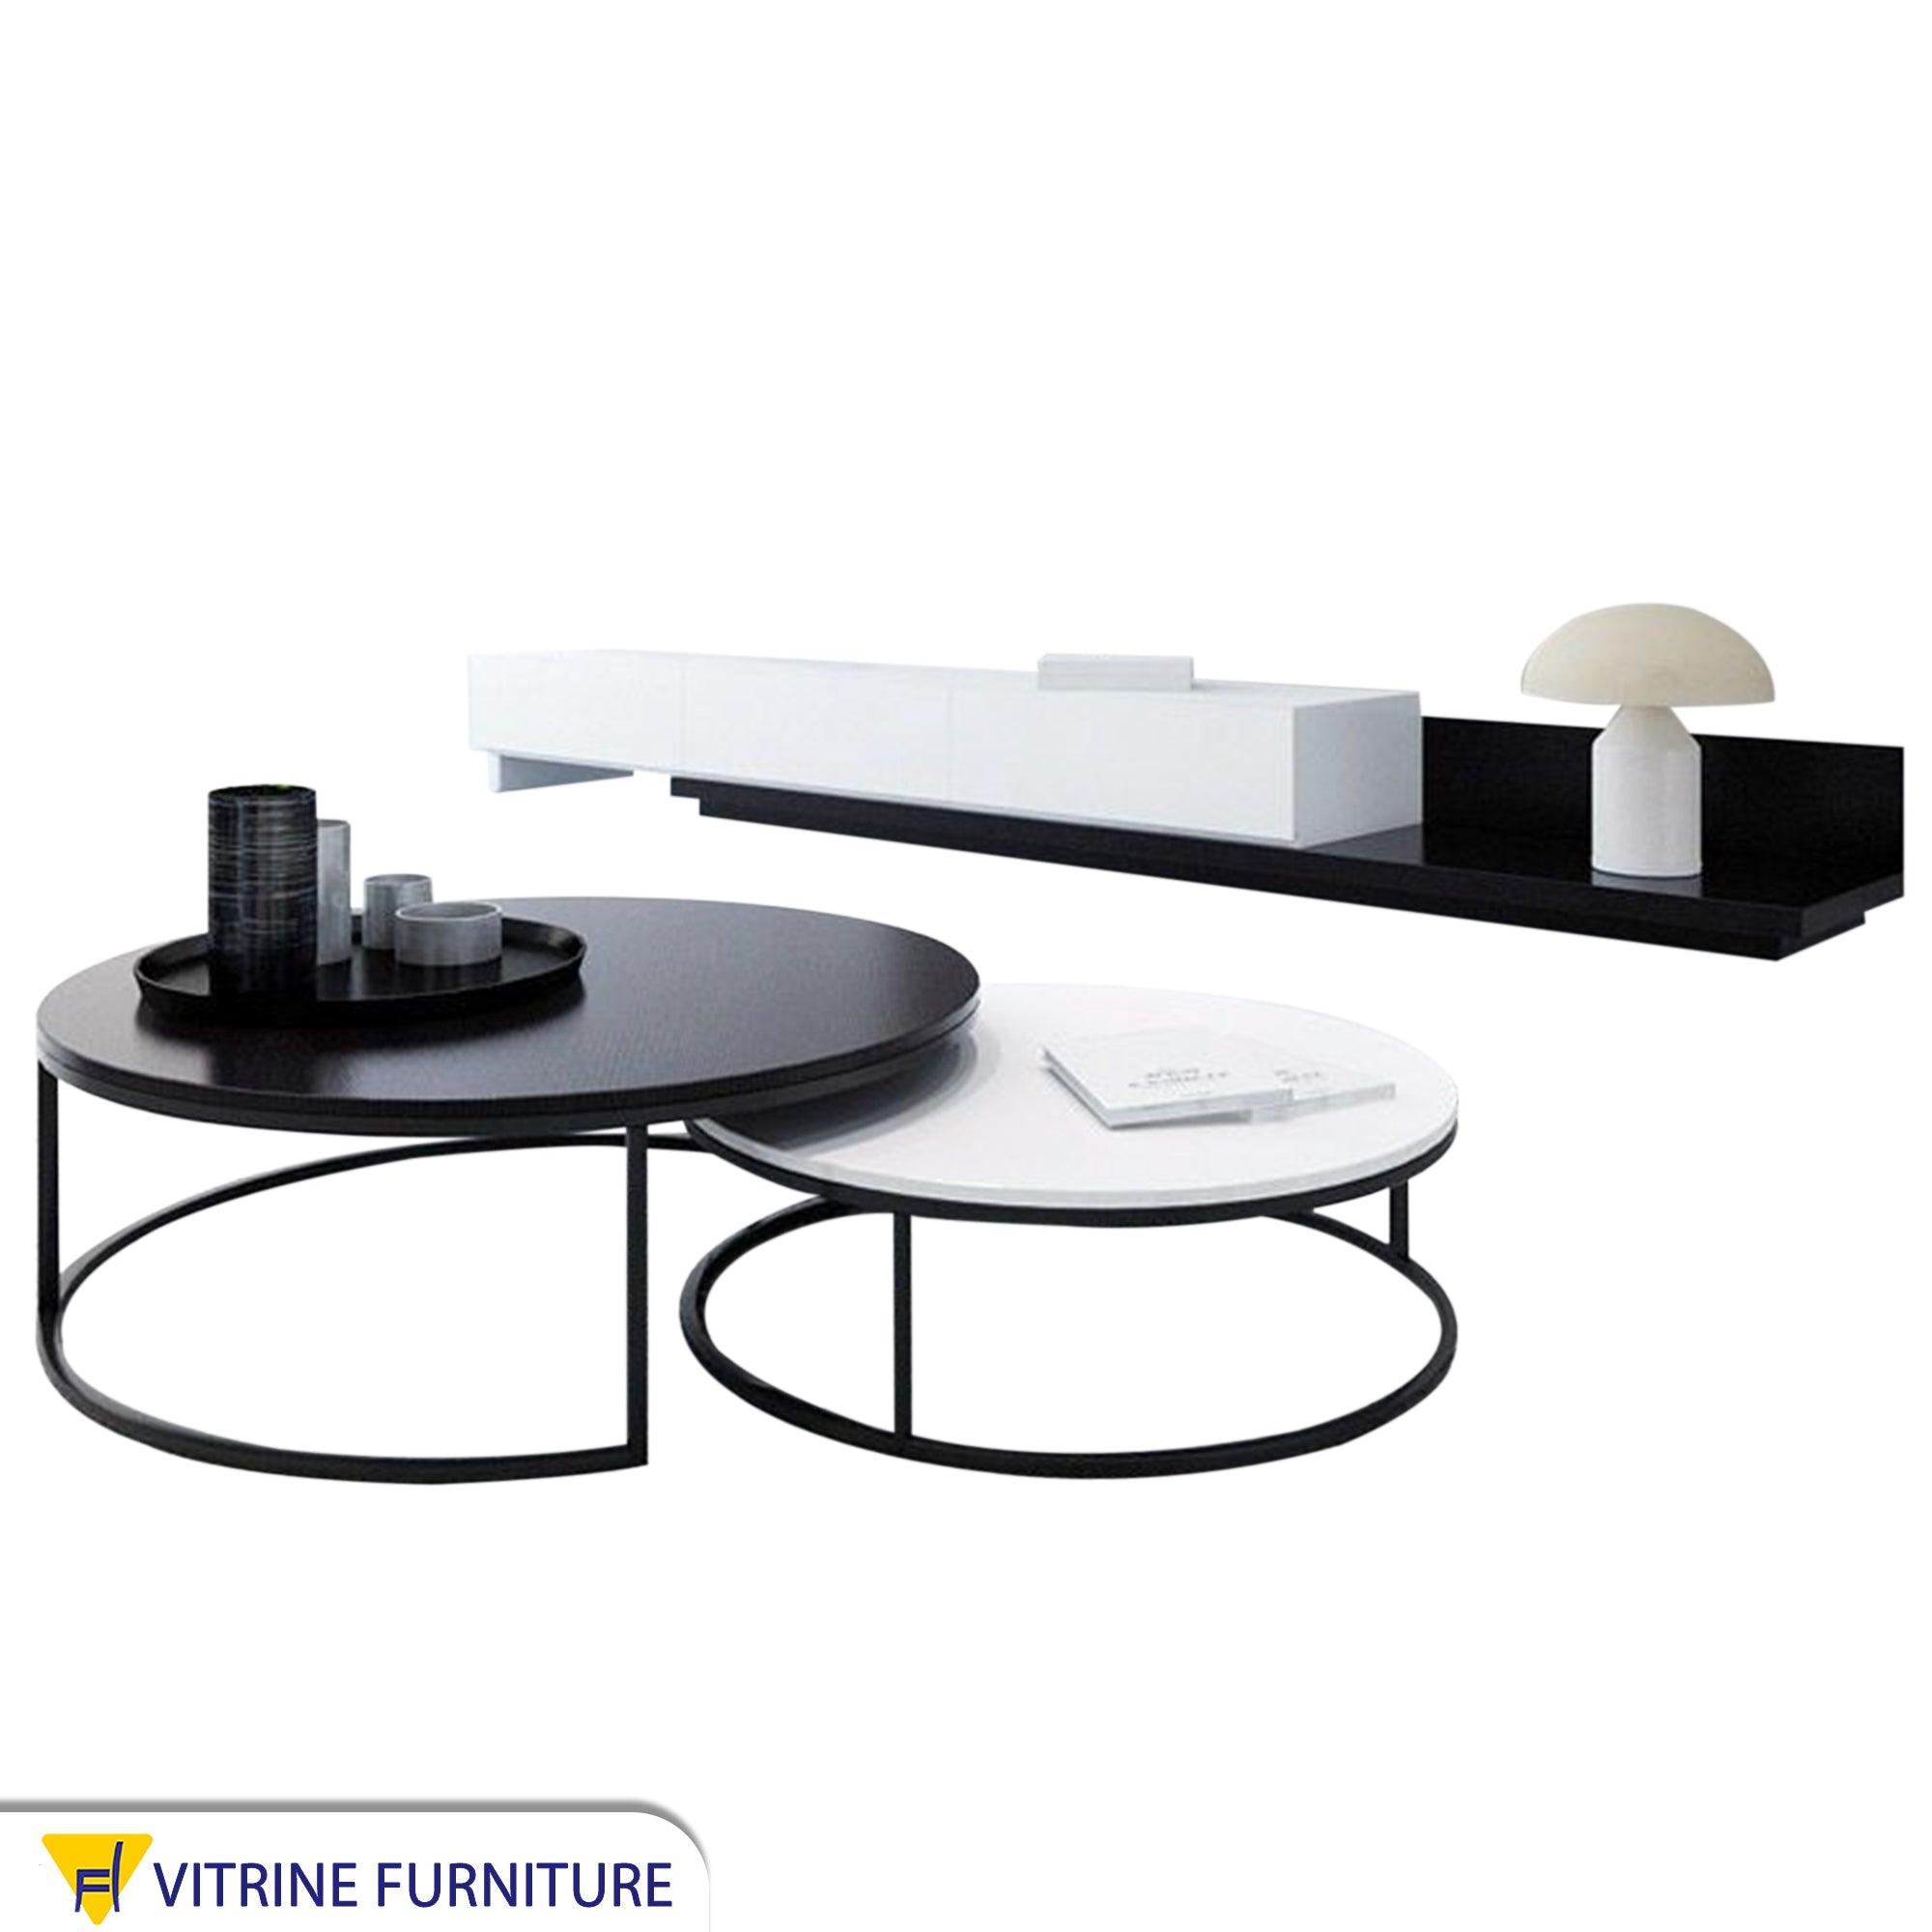 Modern black and white TV unit with circular tables